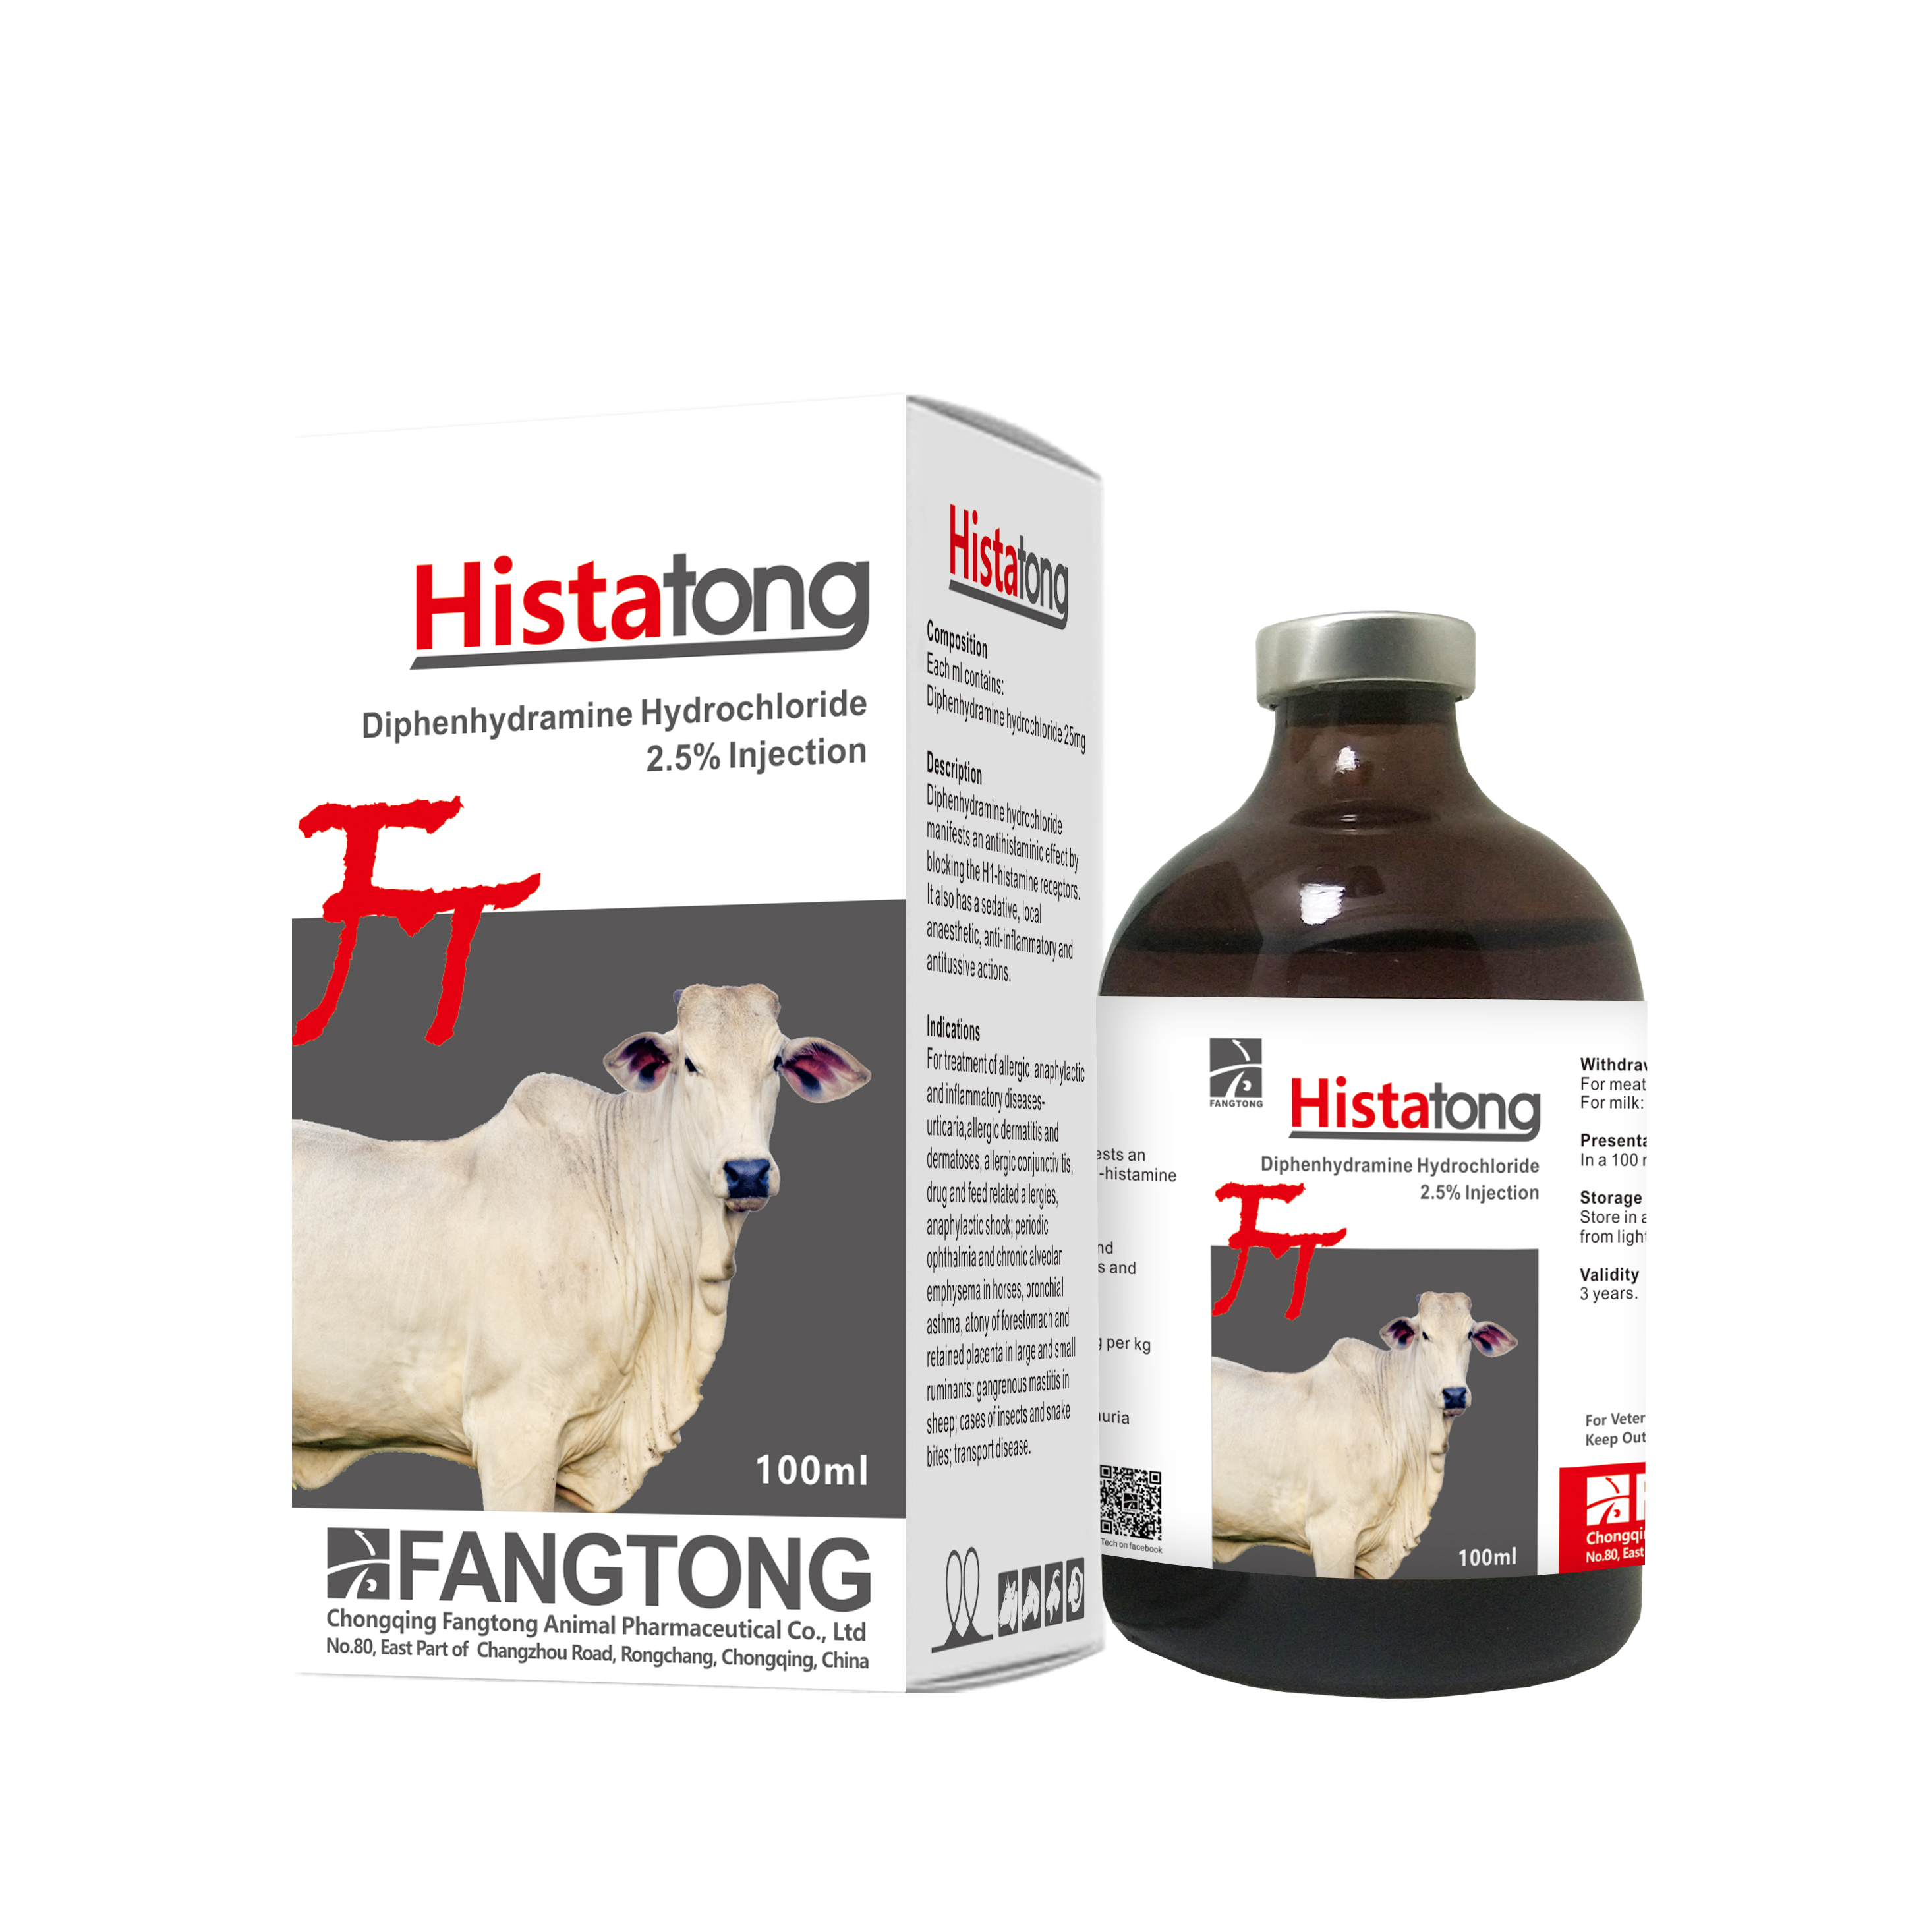 Histatong-Diphenhydramine Hydrochloride 2.5% Injection Featured Image